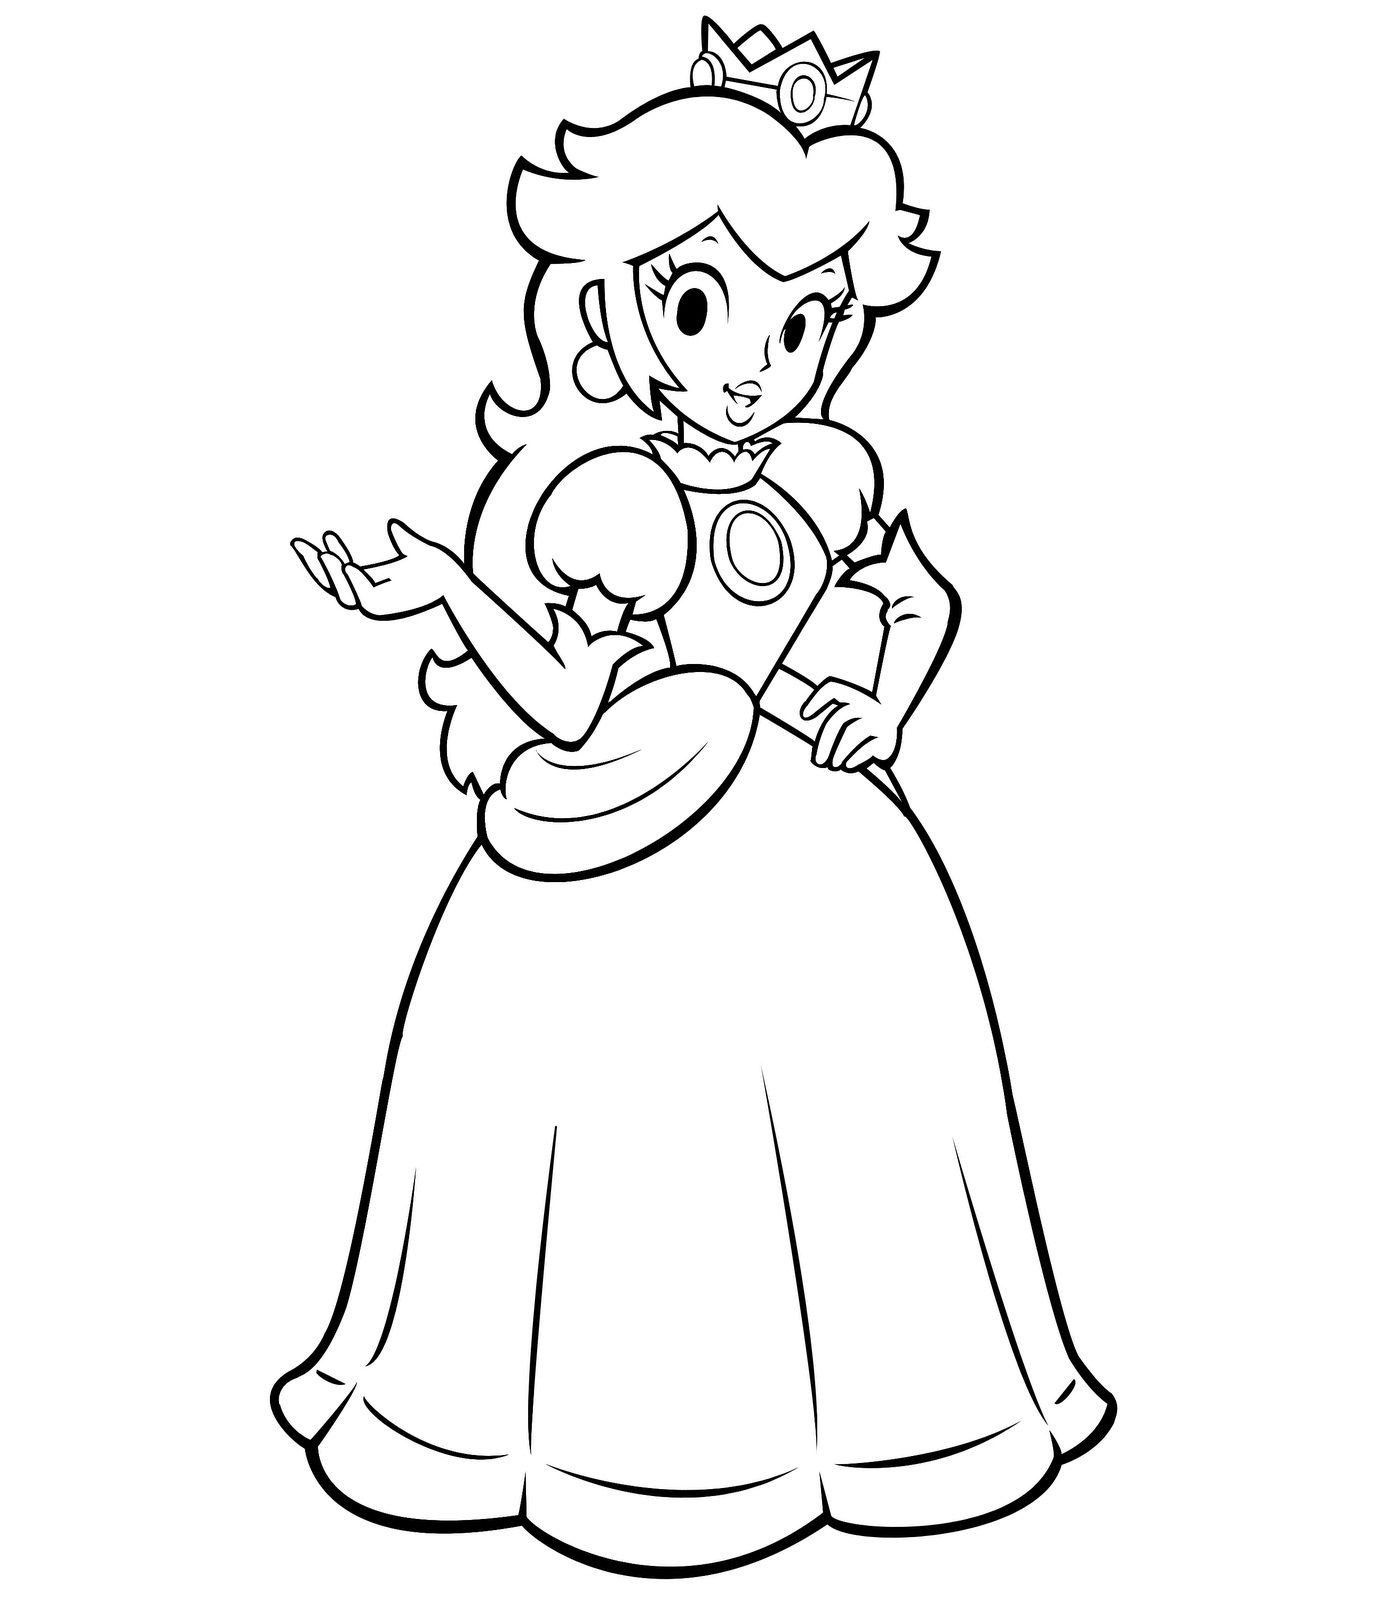 Profitable Mario Princess Peach Coloring Pages To Print Free For Kids